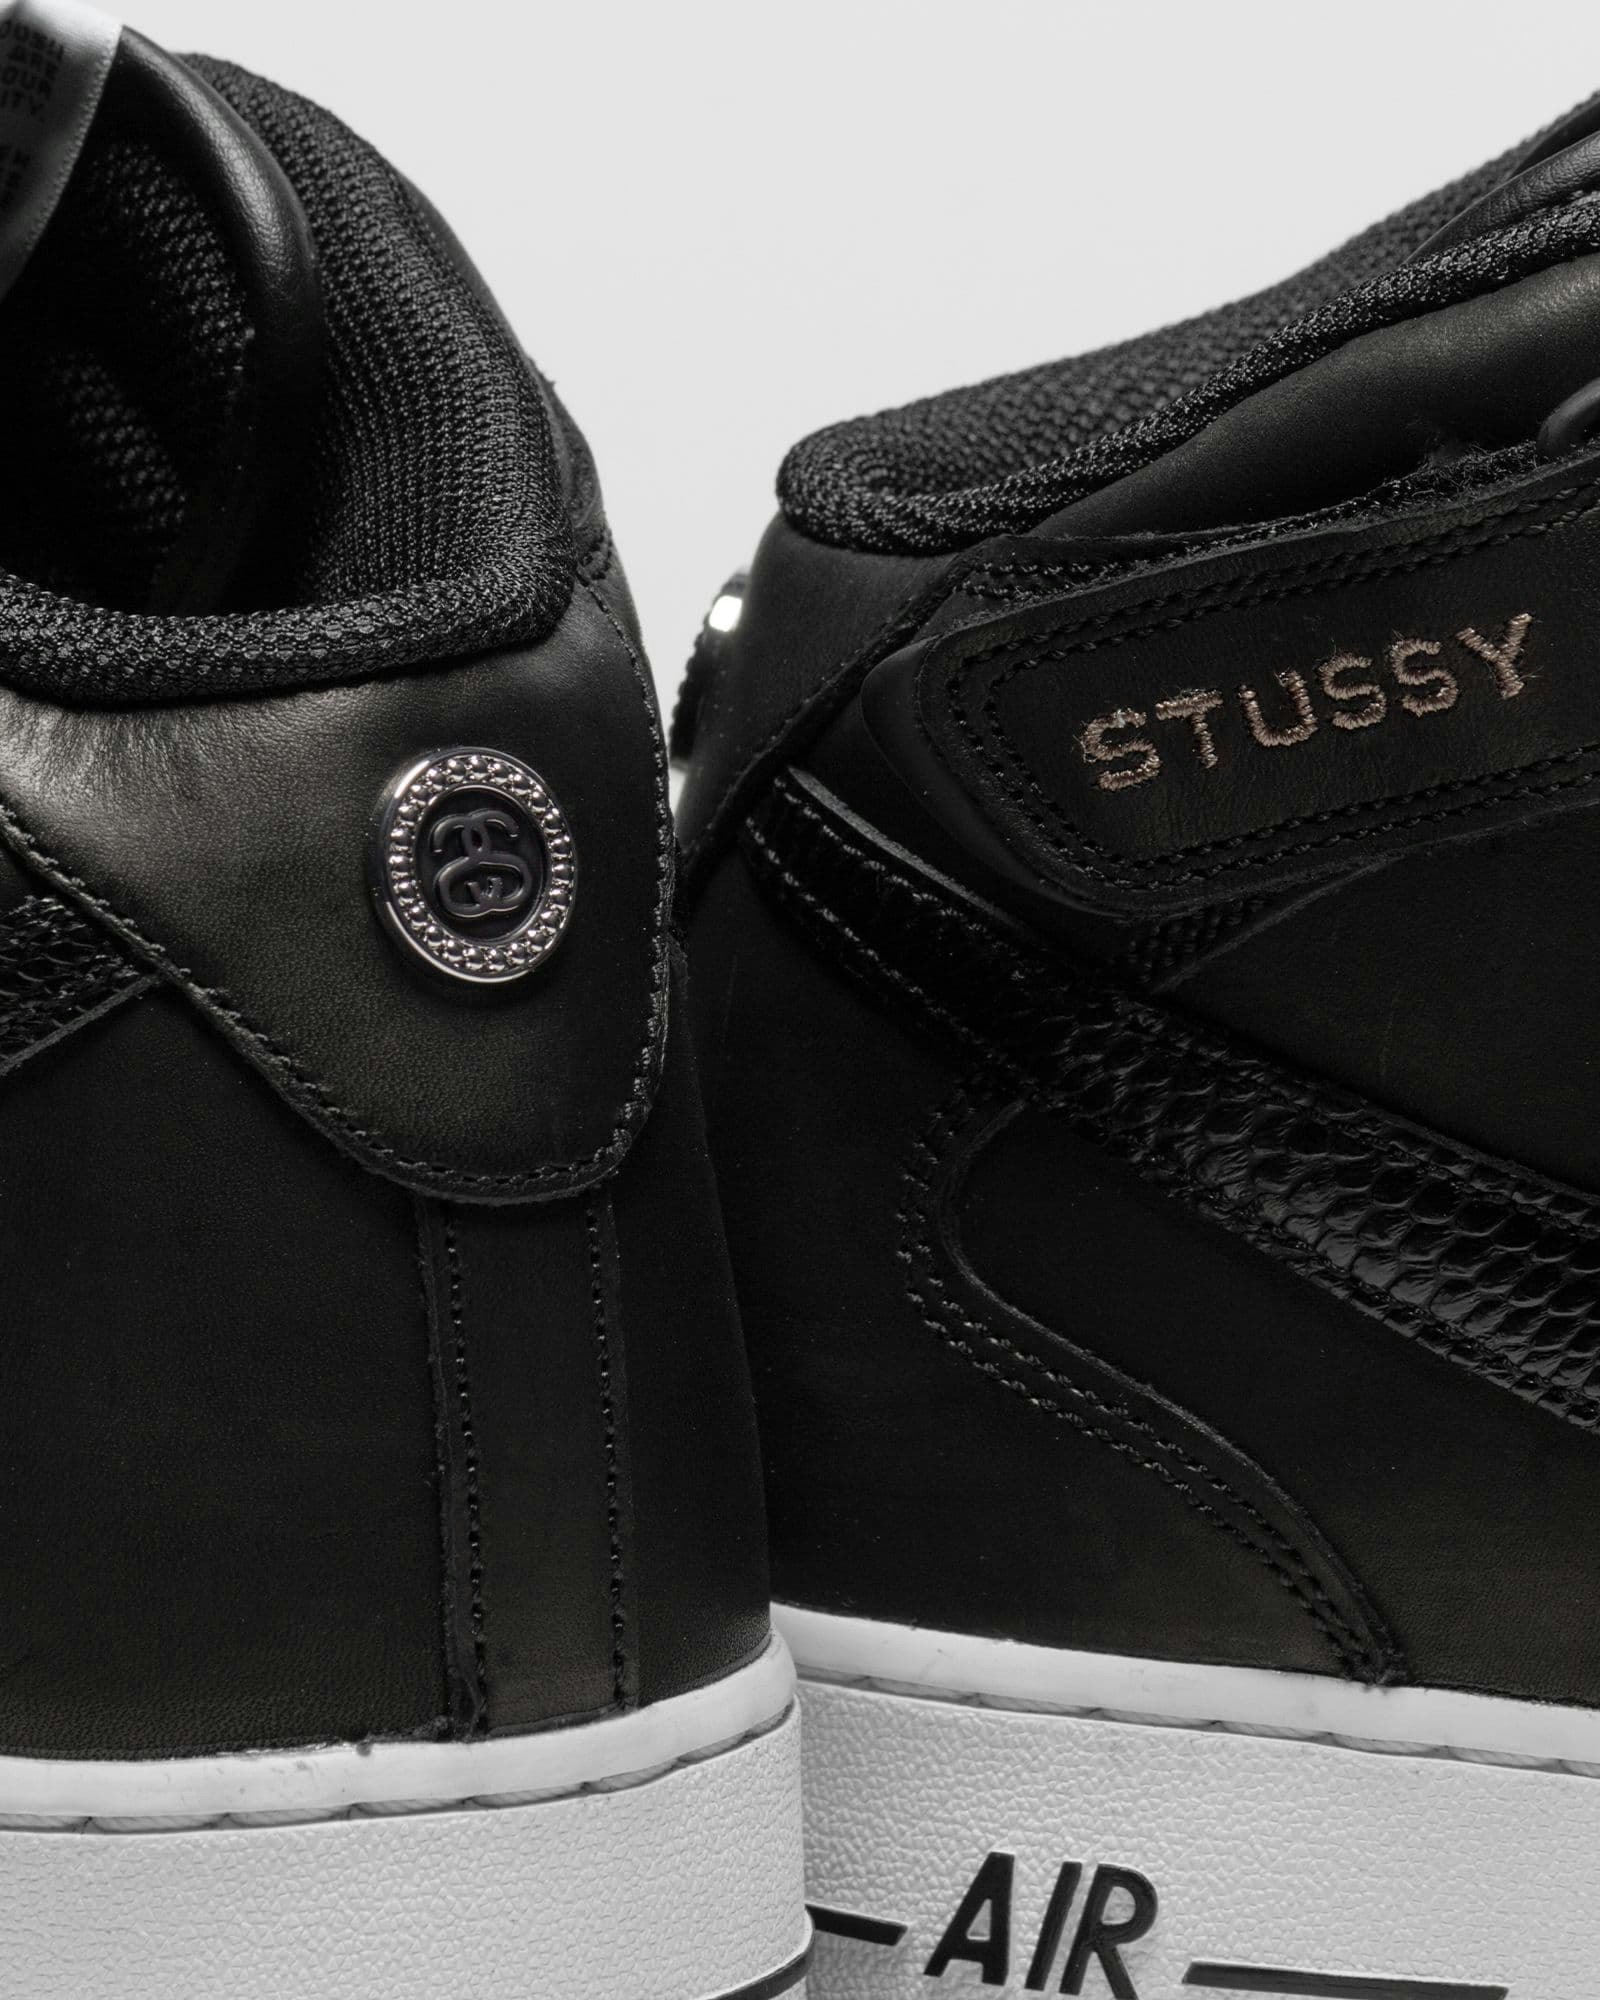 Stüssy x Nike Air Force 1 Mid "Black Luxe Leather"